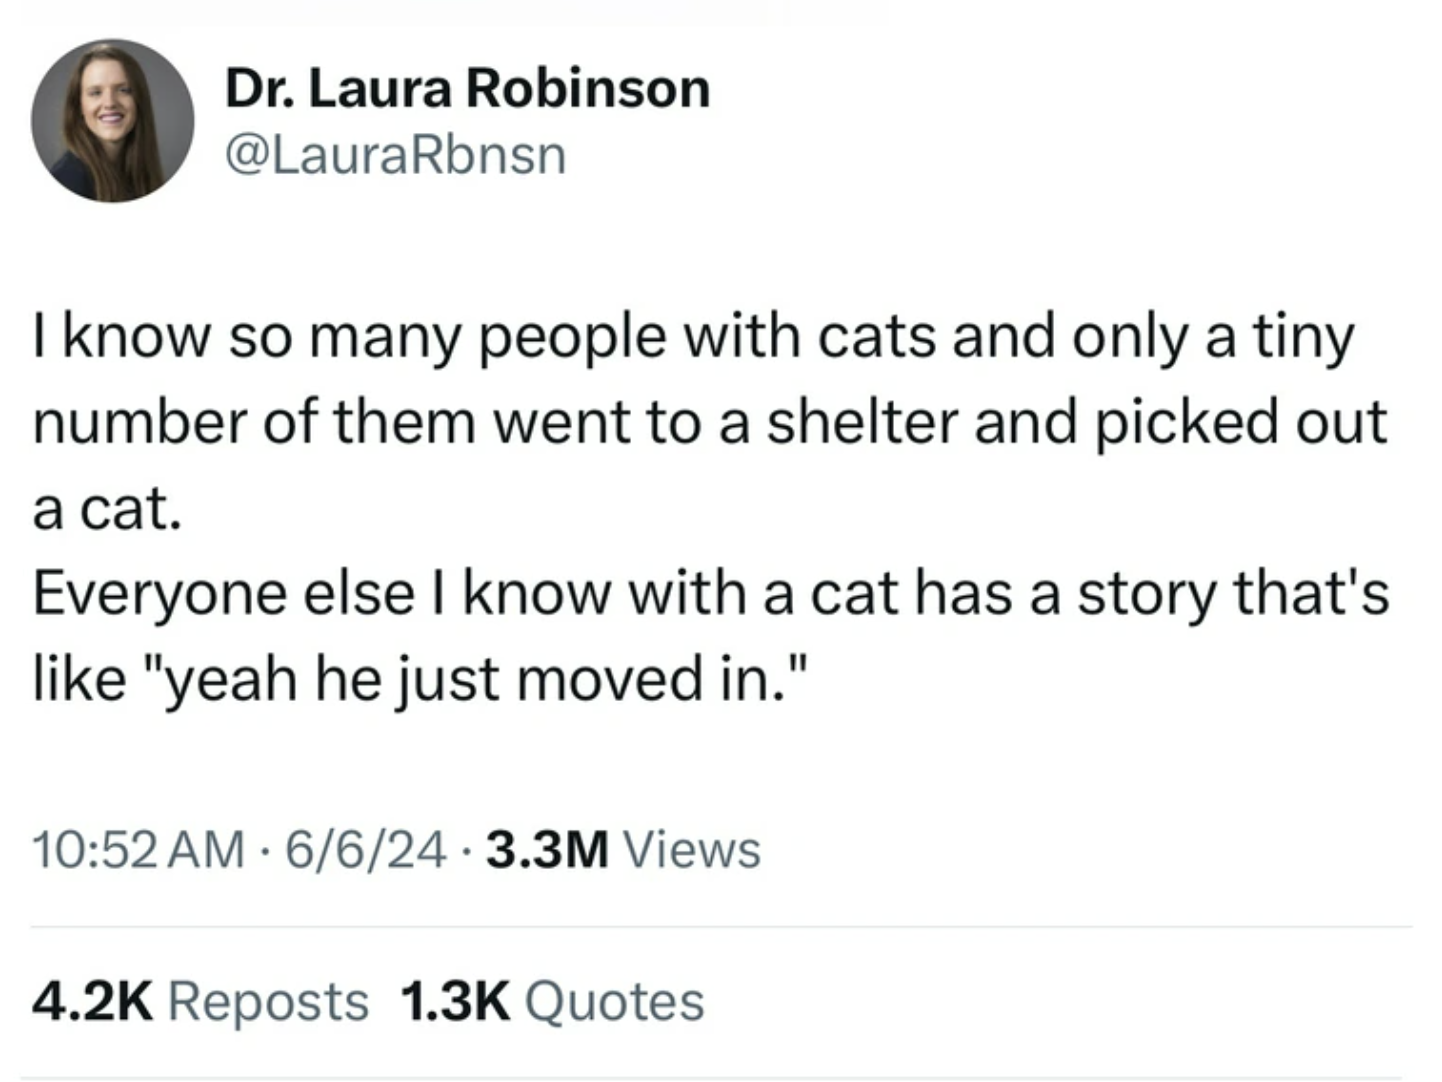 screenshot - Dr. Laura Robinson I know so many people with cats and only a tiny number of them went to a shelter and picked out a cat. Everyone else I know with a cat has a story that's "yeah he just moved in." 6624 3.3M Views Reposts Quotes